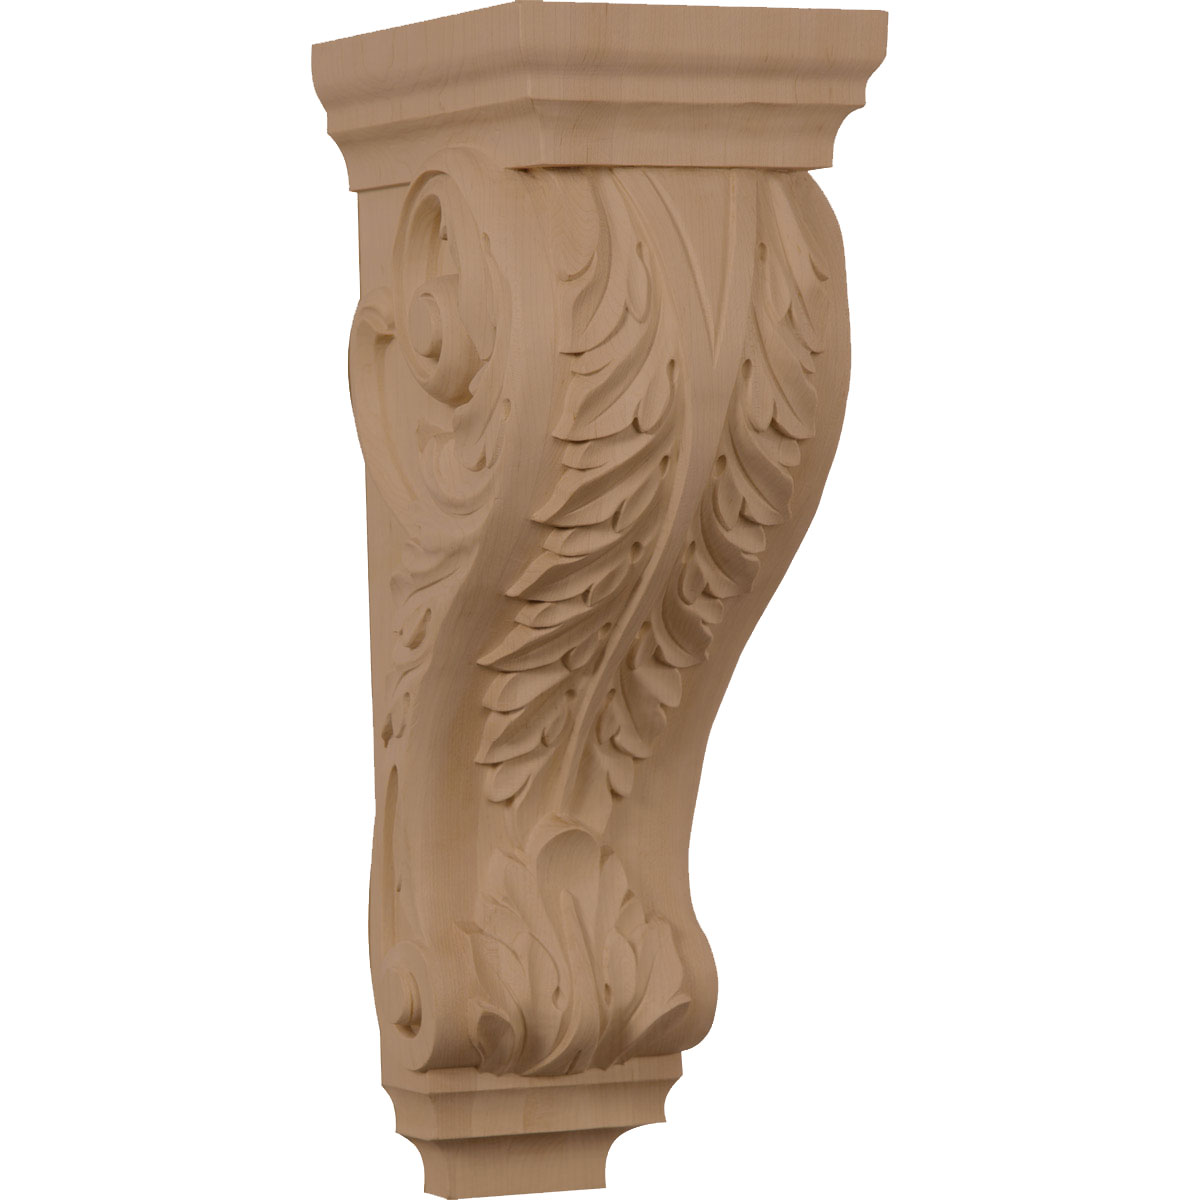 DwellingDesigns 6 x 7.5 x 18 in. Extra Large Acanthus Wood Corbel - Cherry